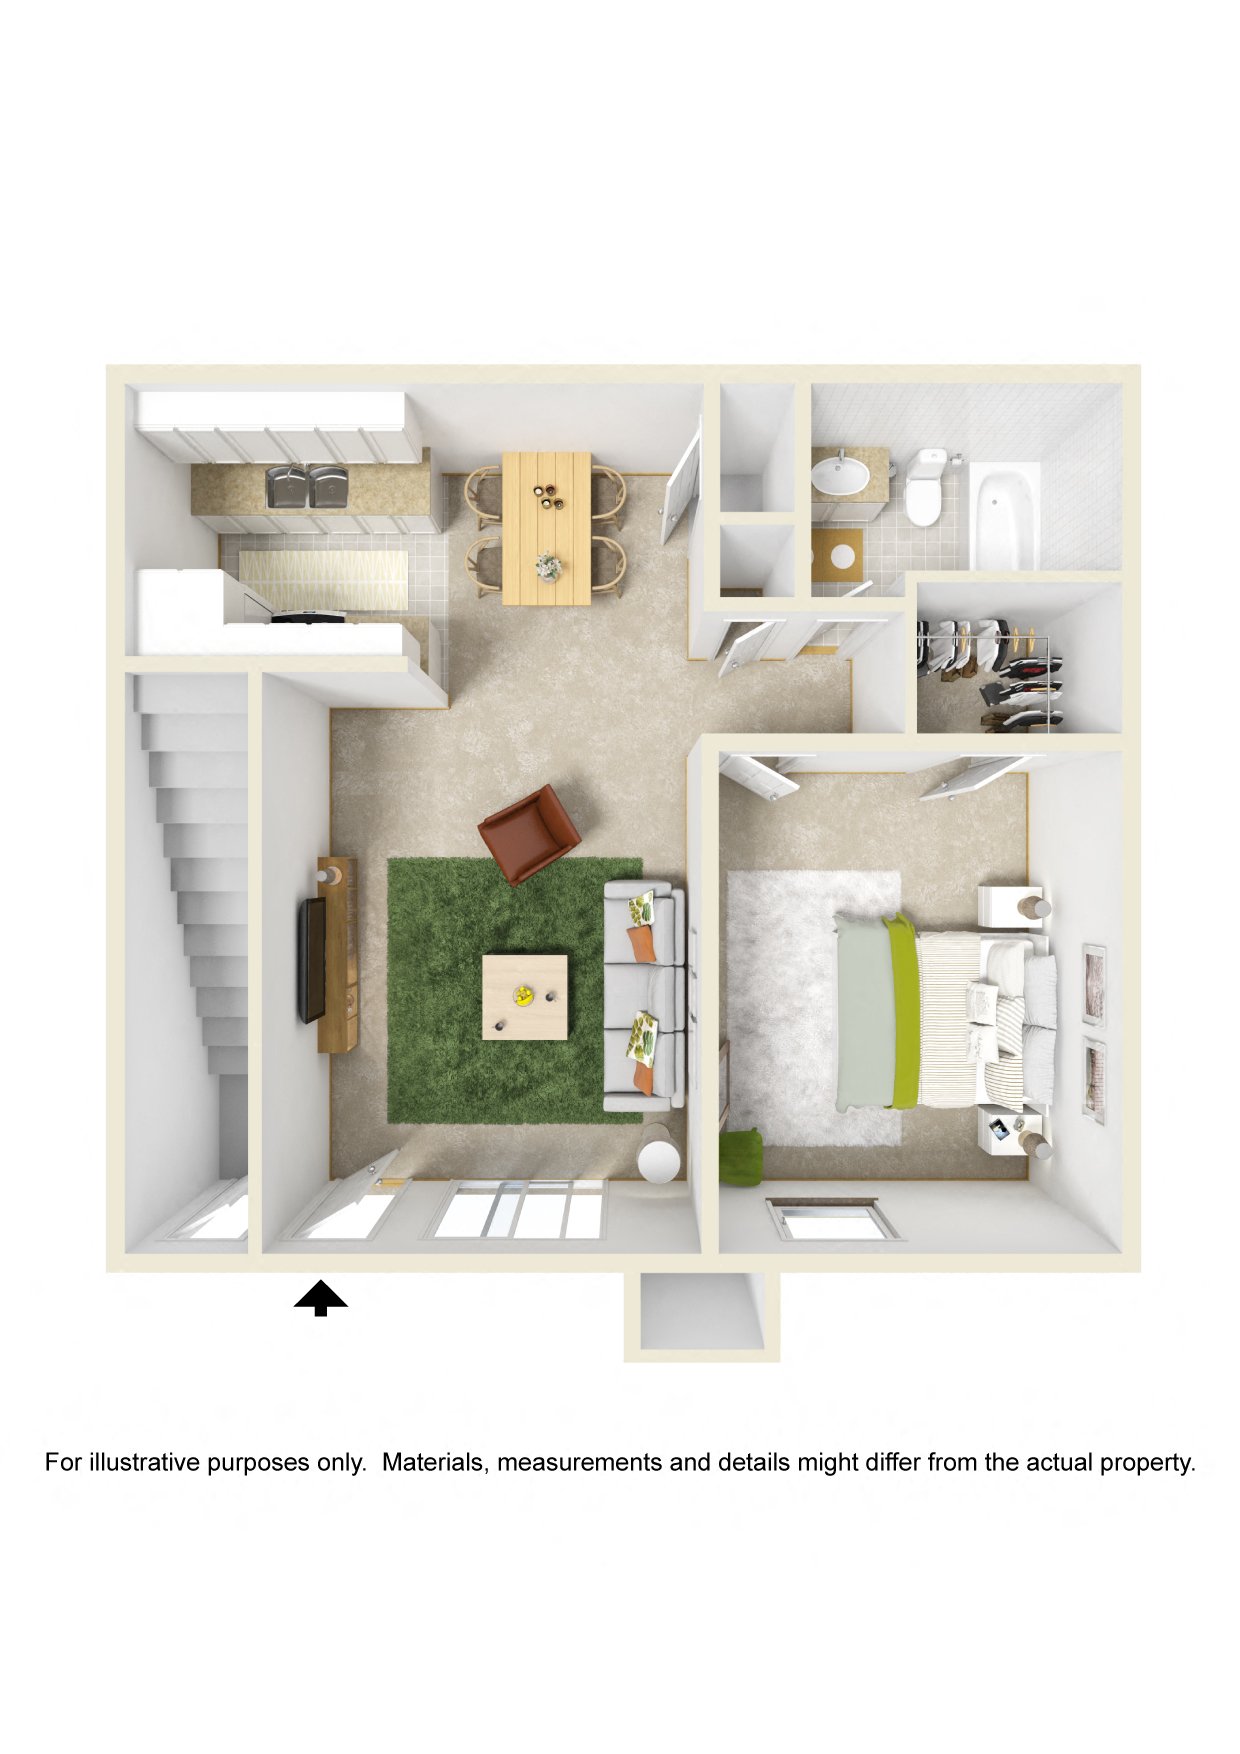 1 Bed (W/D Connections Optional)